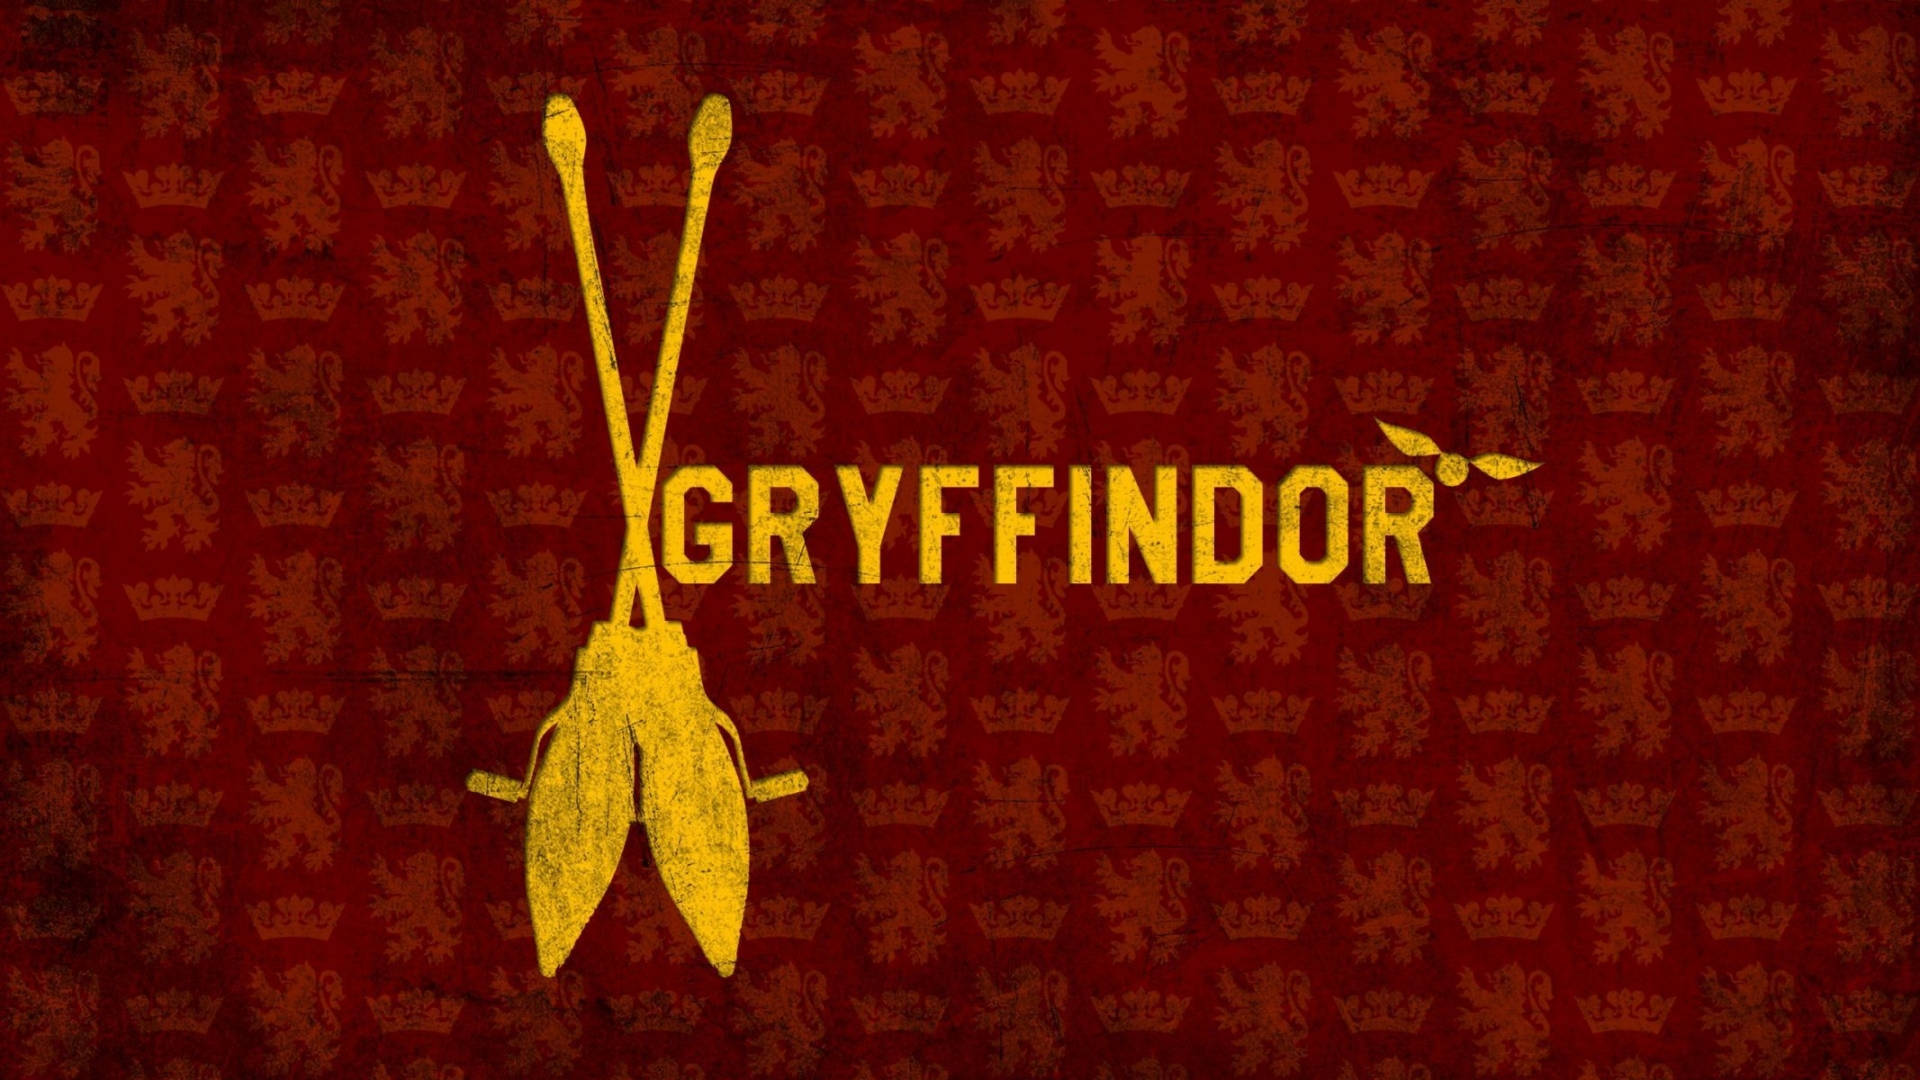 Harry Potter Houses Gryffindor Quidditch